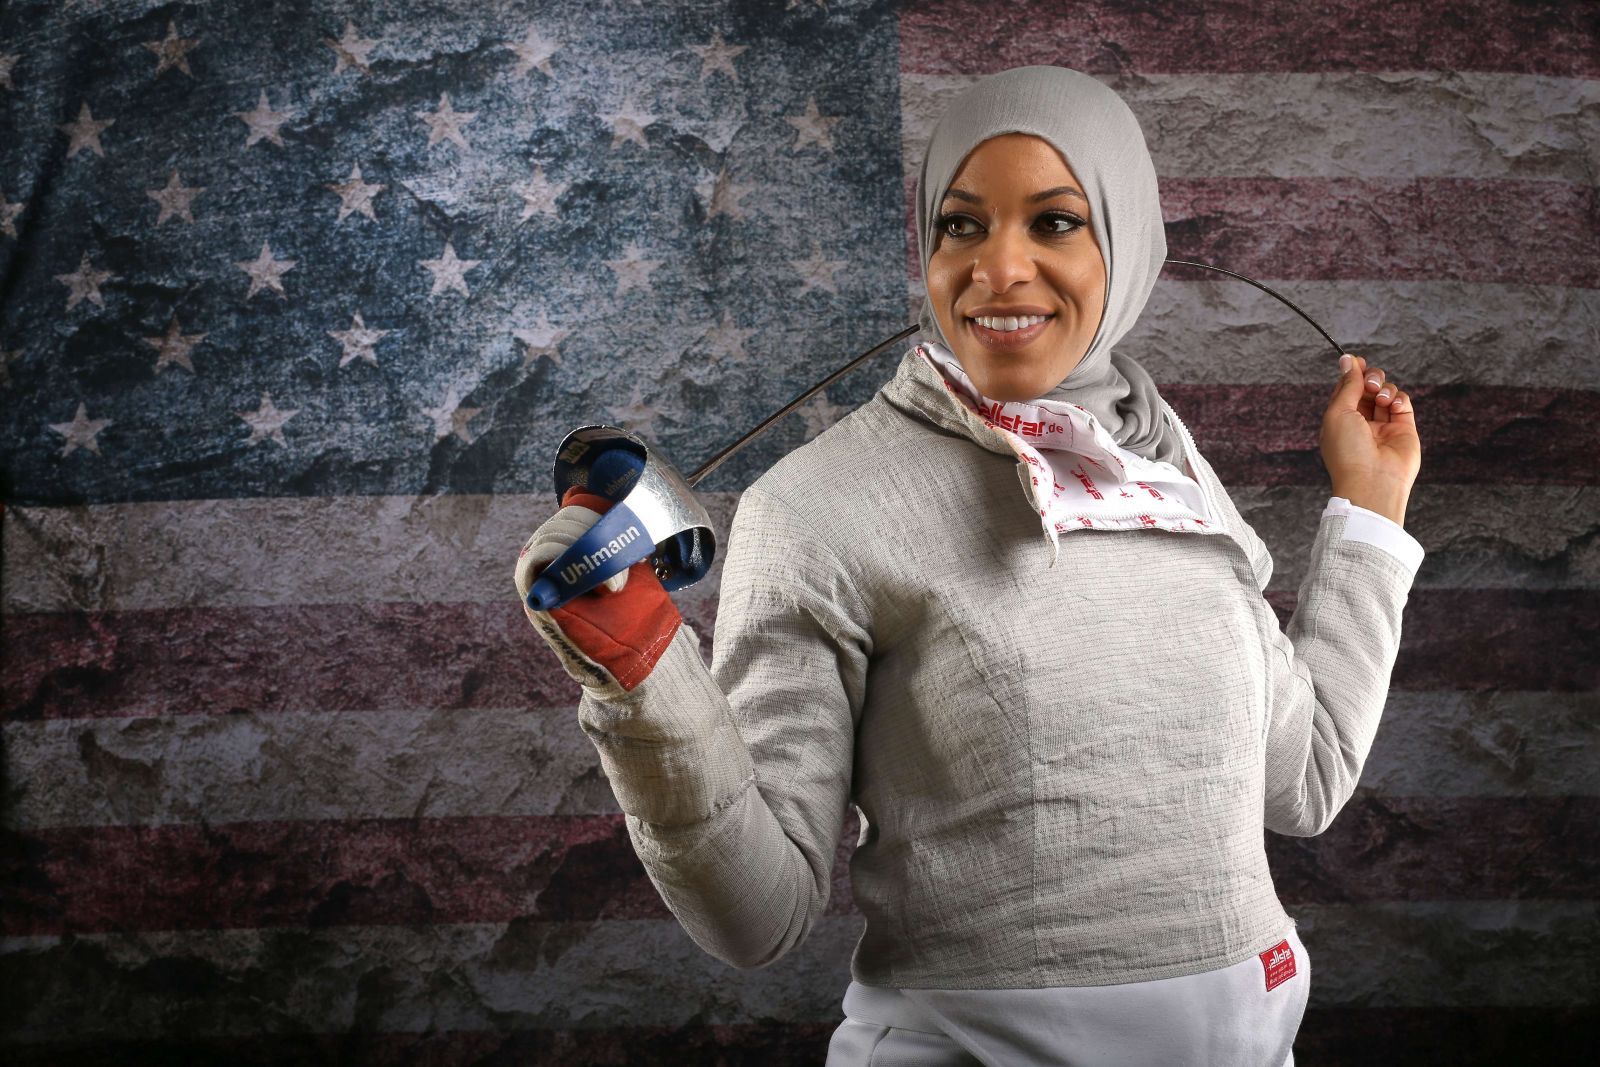 A female Muslim fencer competed for the U.S. in the Rio Olympics.